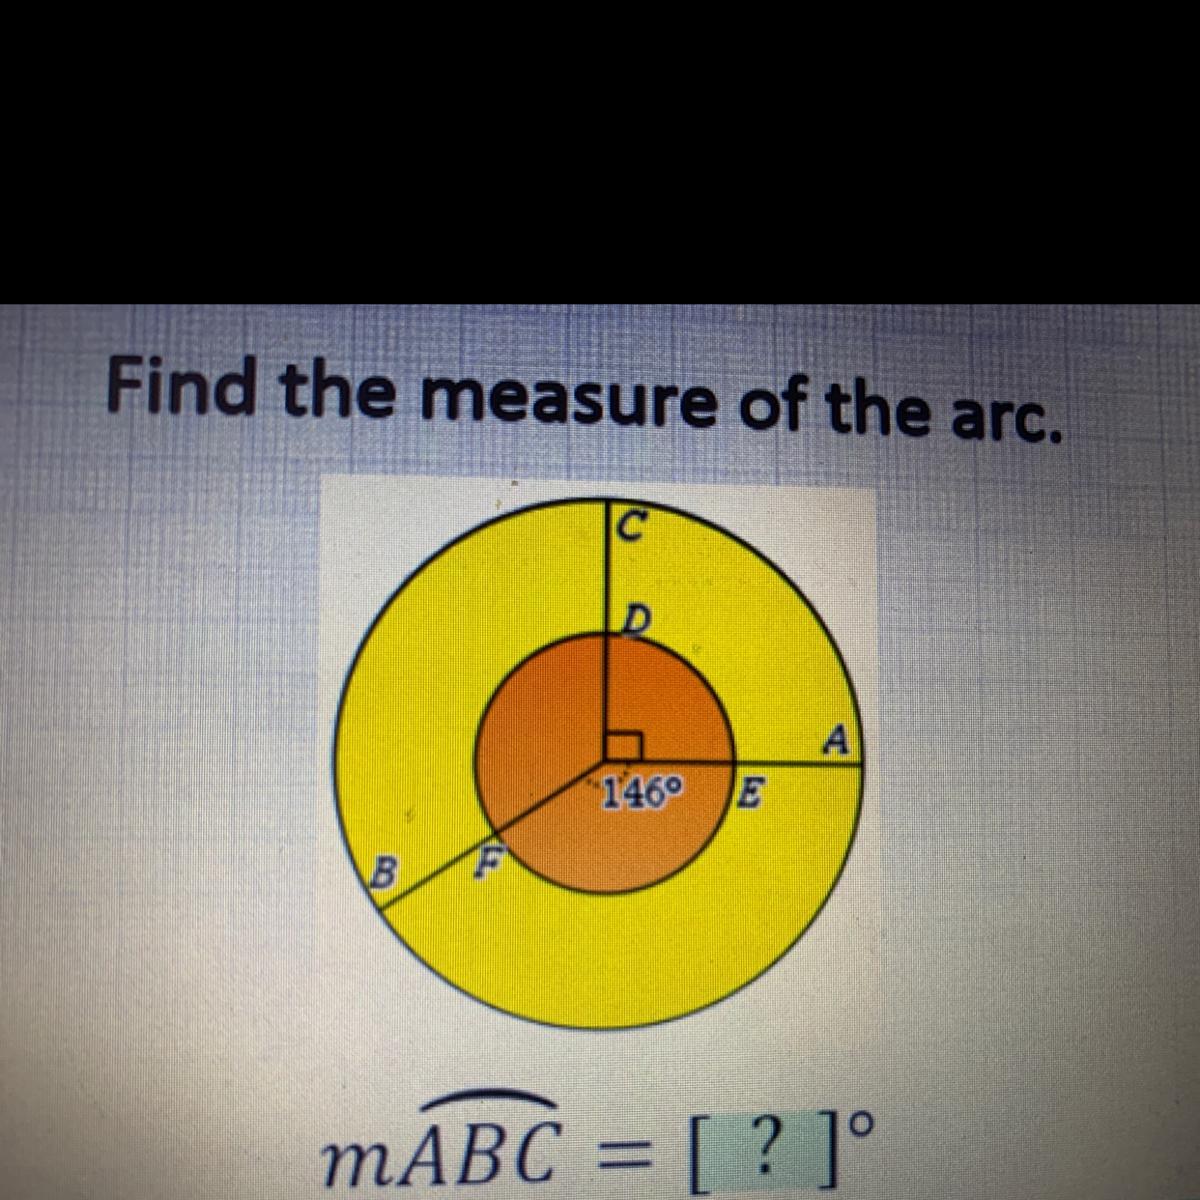 Find The Measure Of The Arc.1460EB.MABC = [ ? ]